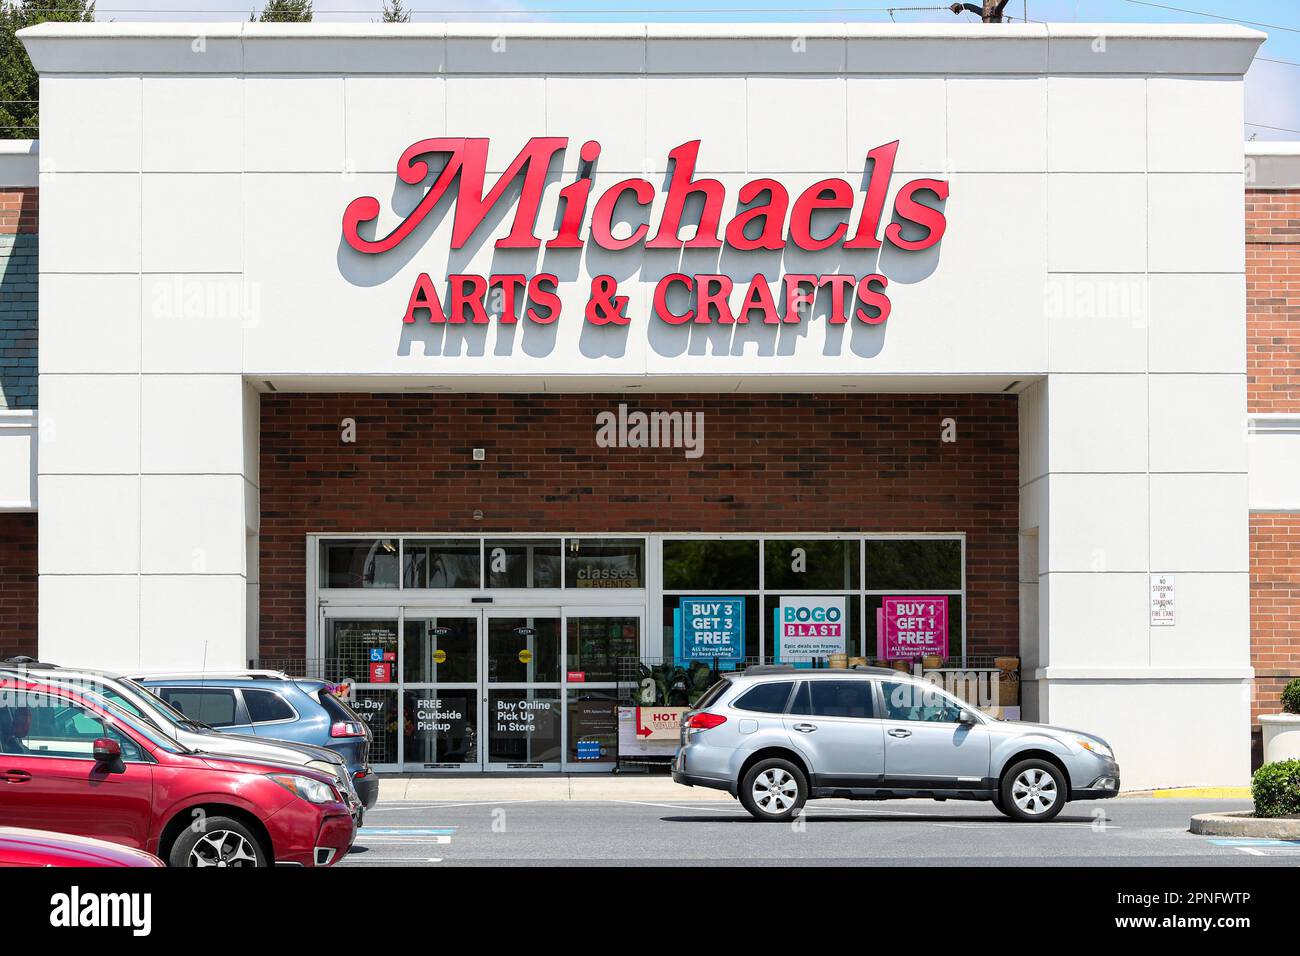 https://c8.alamy.com/comp/2PNFWTP/harrisburg-united-states-18th-apr-2023-an-exterior-view-of-the-michaels-arts-crafts-store-at-the-paxton-towne-centre-near-harrisburg-credit-sopa-images-limitedalamy-live-news-2PNFWTP.jpg